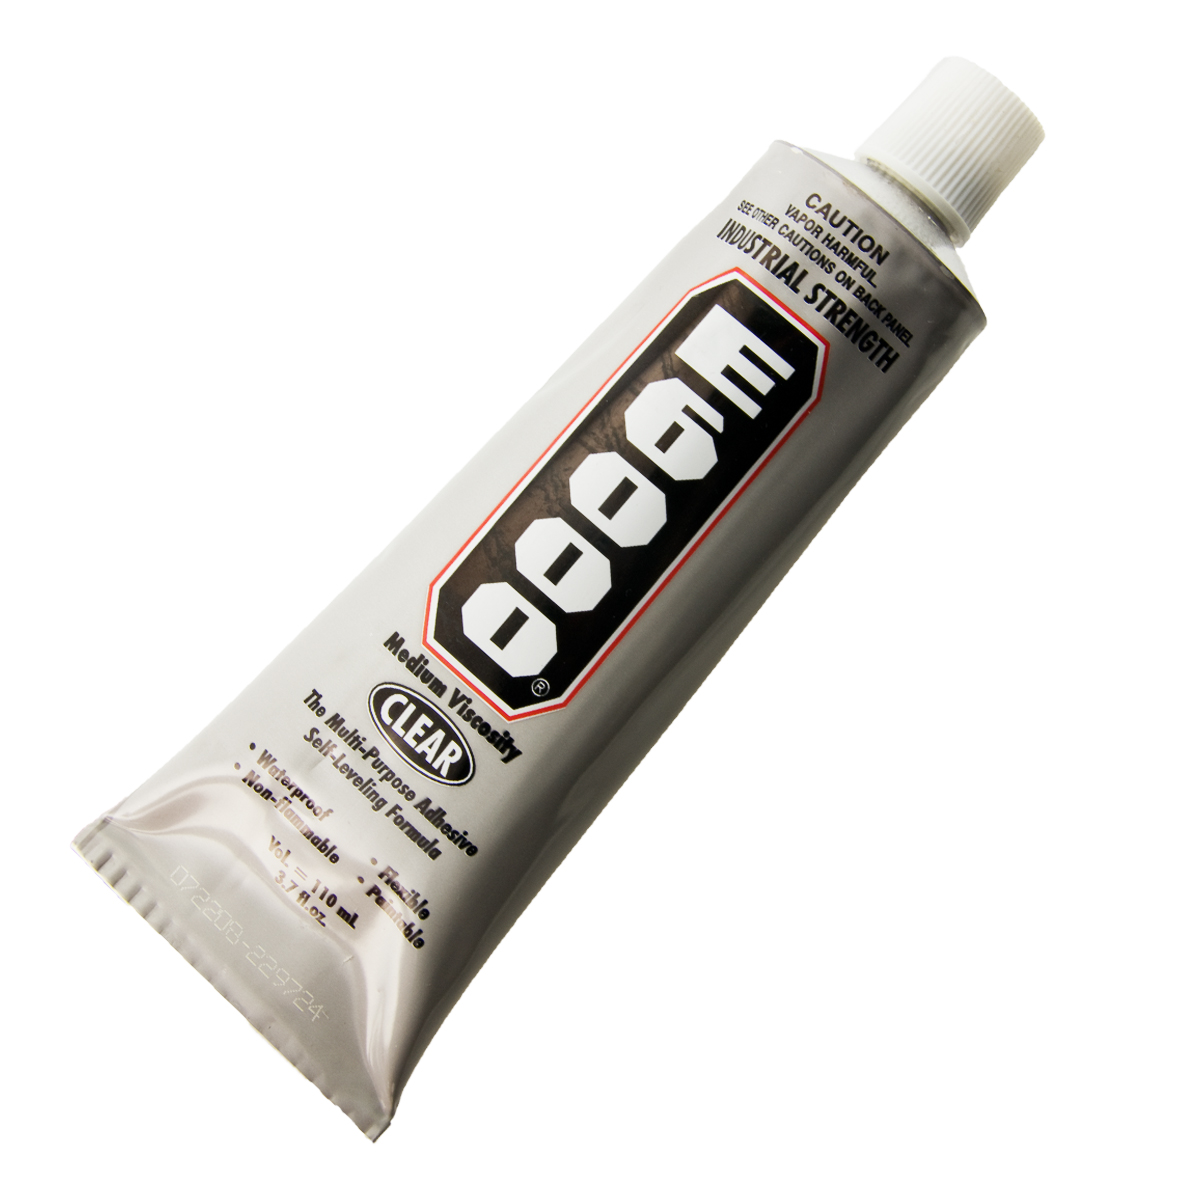 E6000 Adhesive Glue 3.7 oz. - Pack of 1: Wire Jewelry